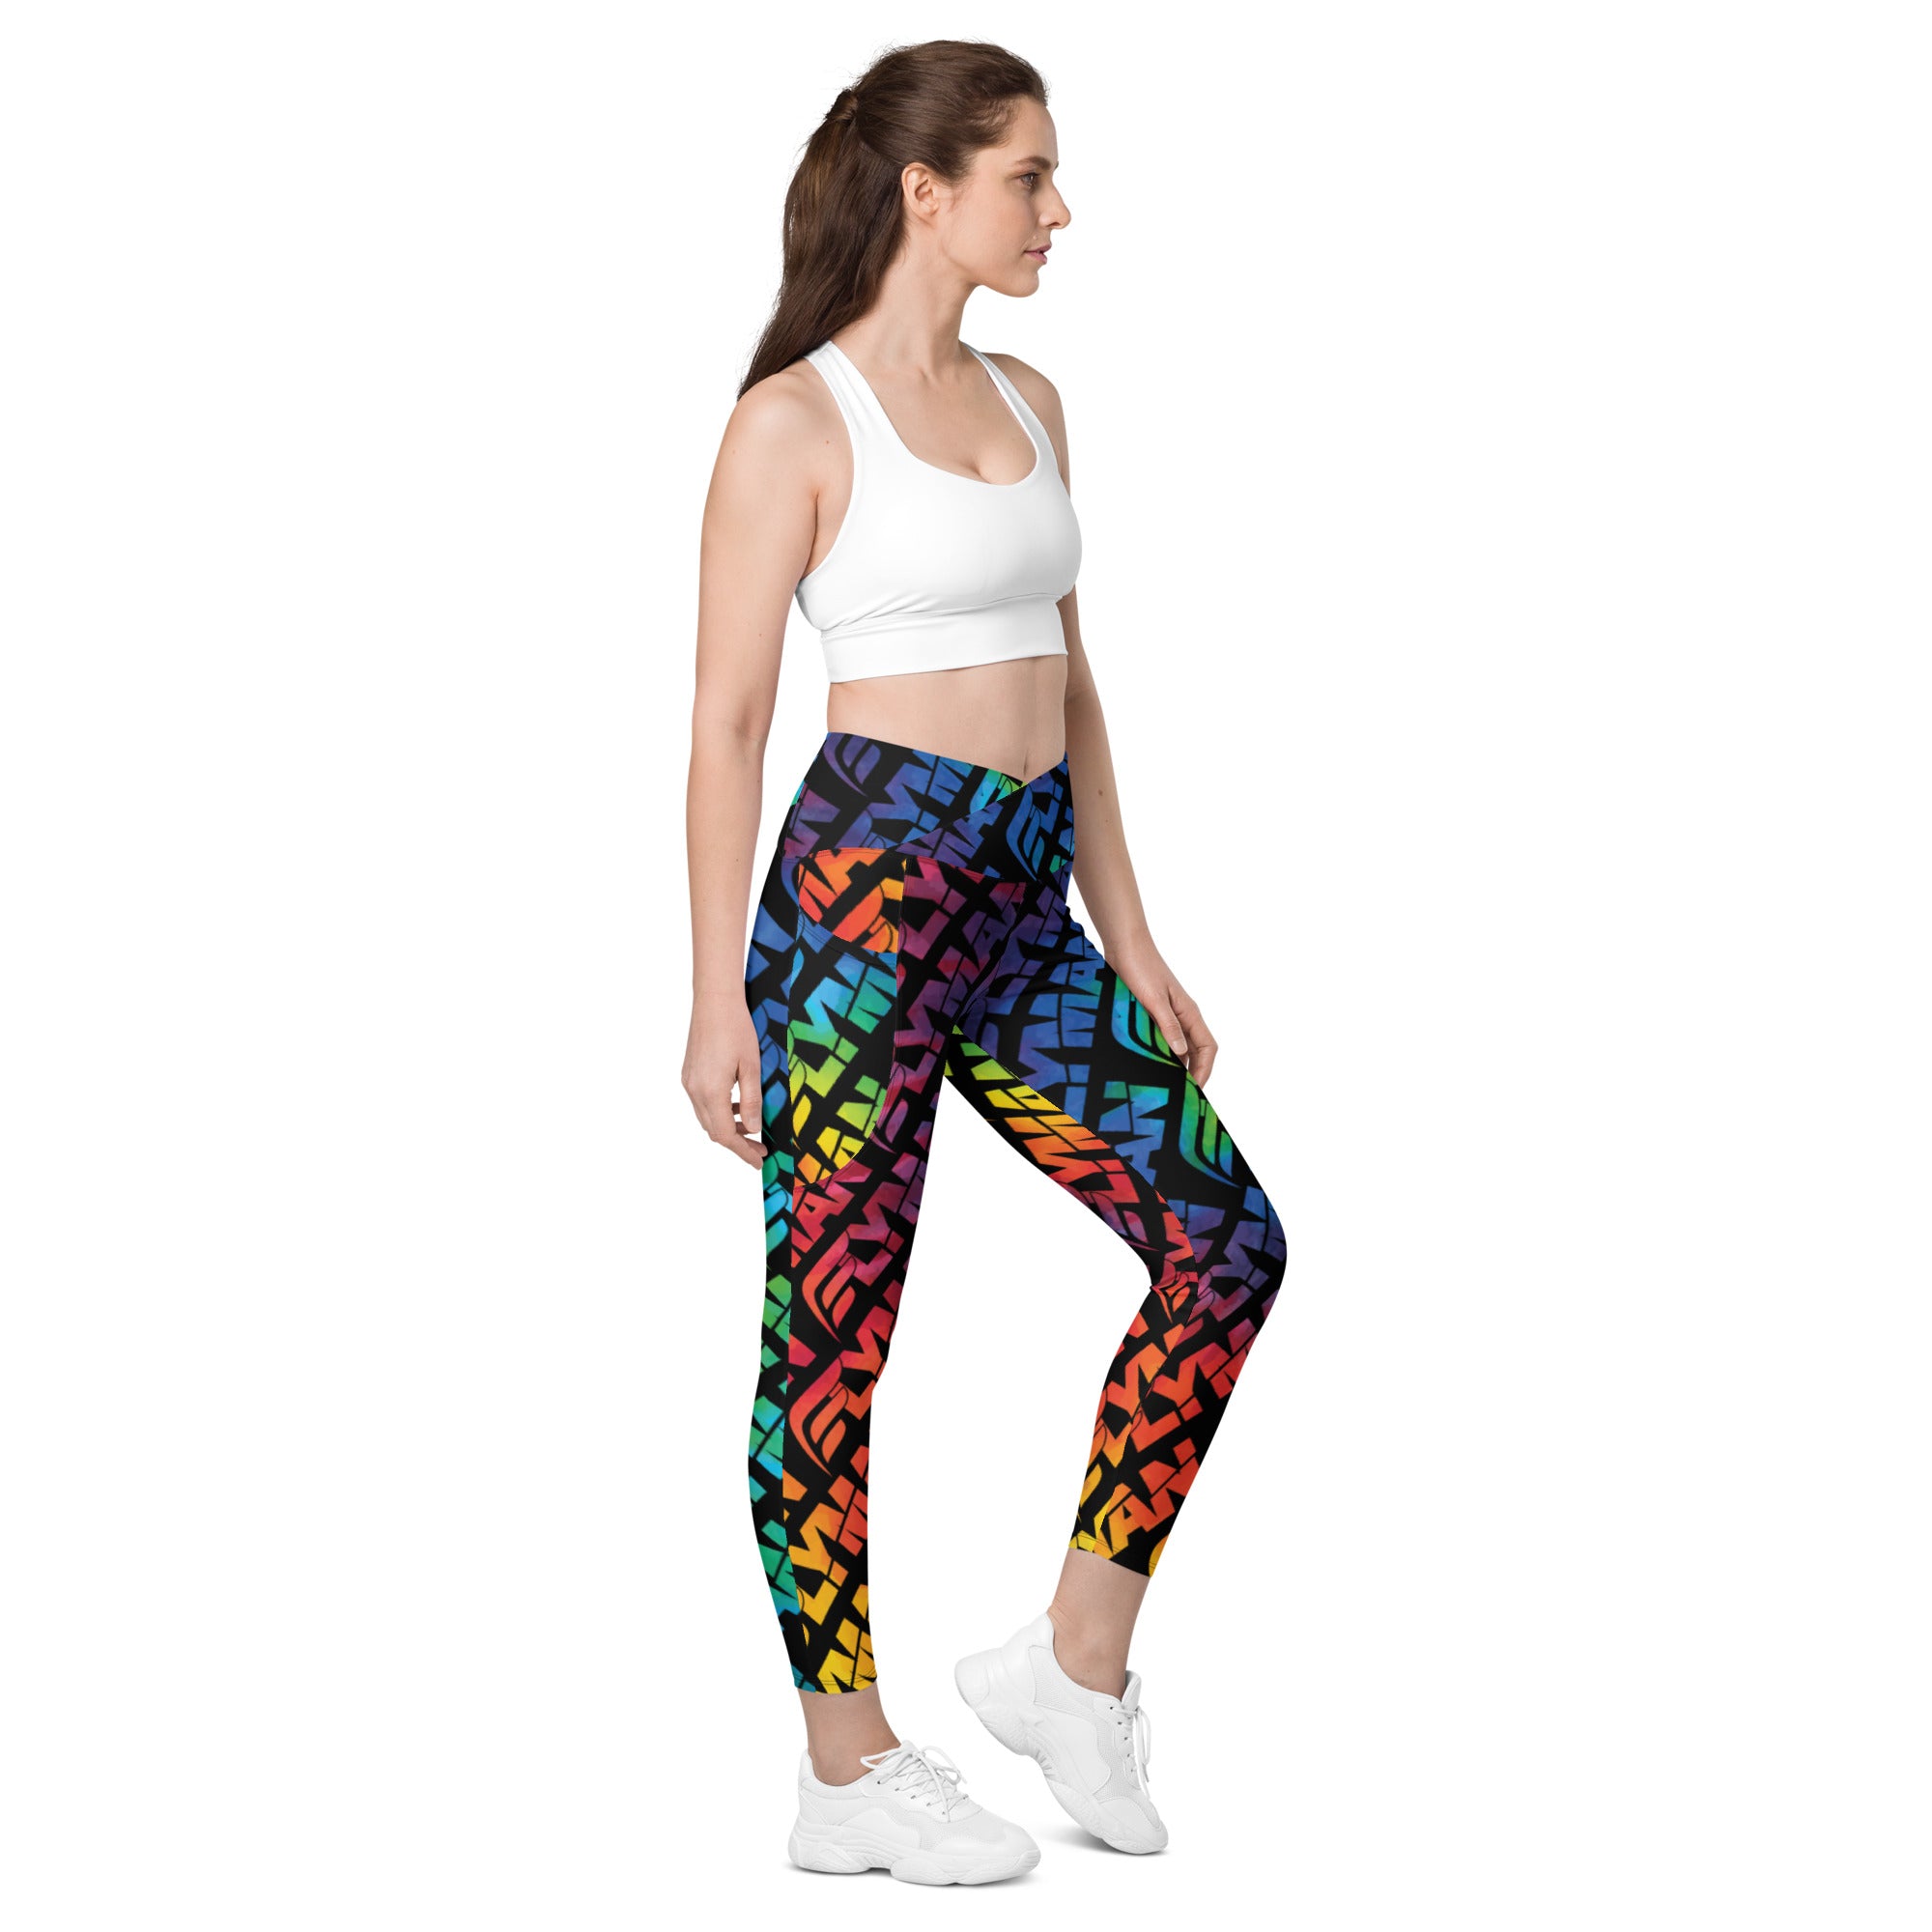 Flyman Tie Crossover leggings with pockets